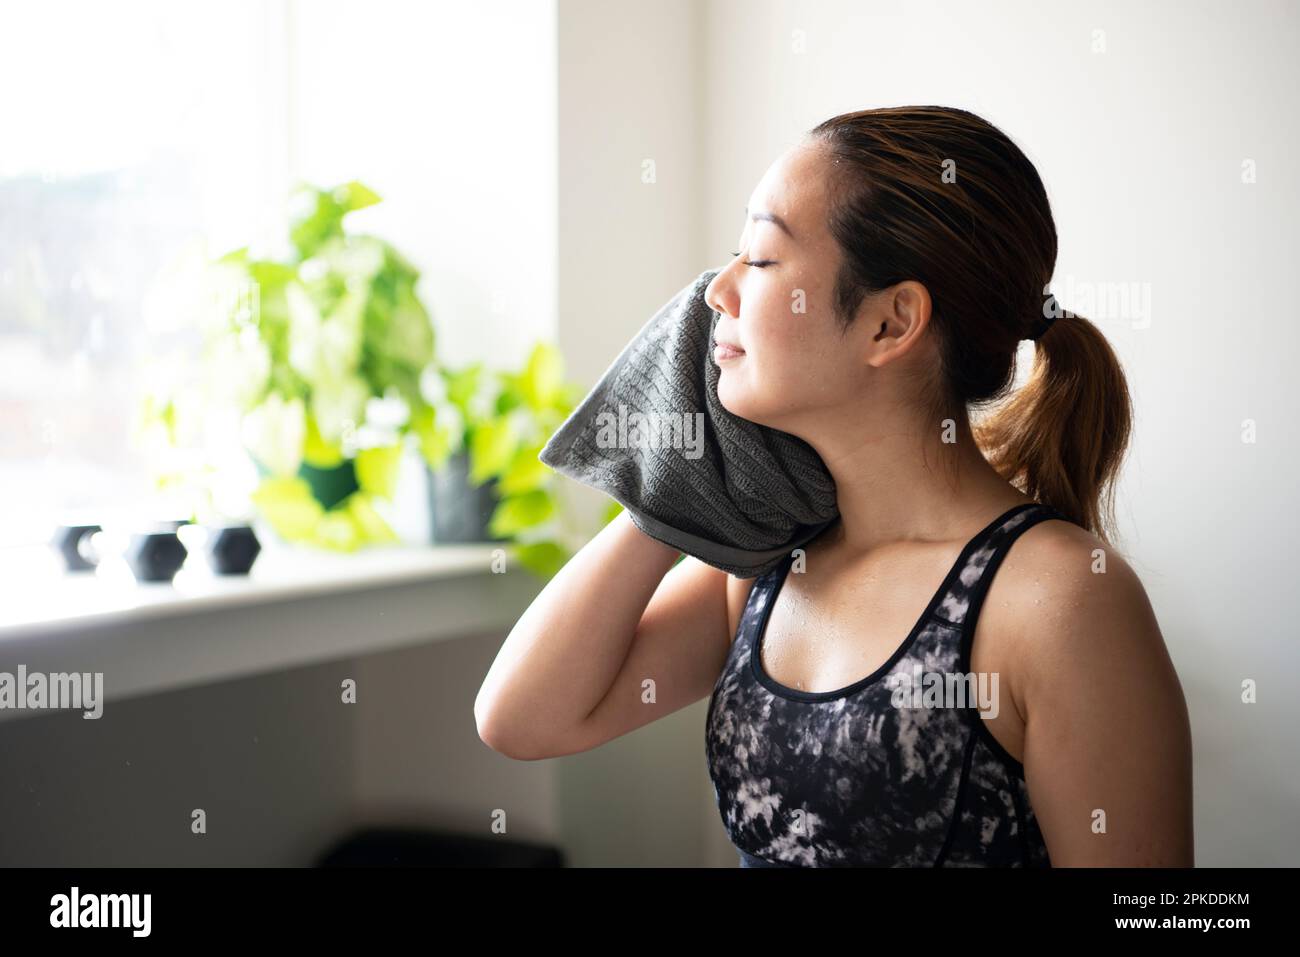 Woman taking a break while wiping sweat off at the gym Stock Photo